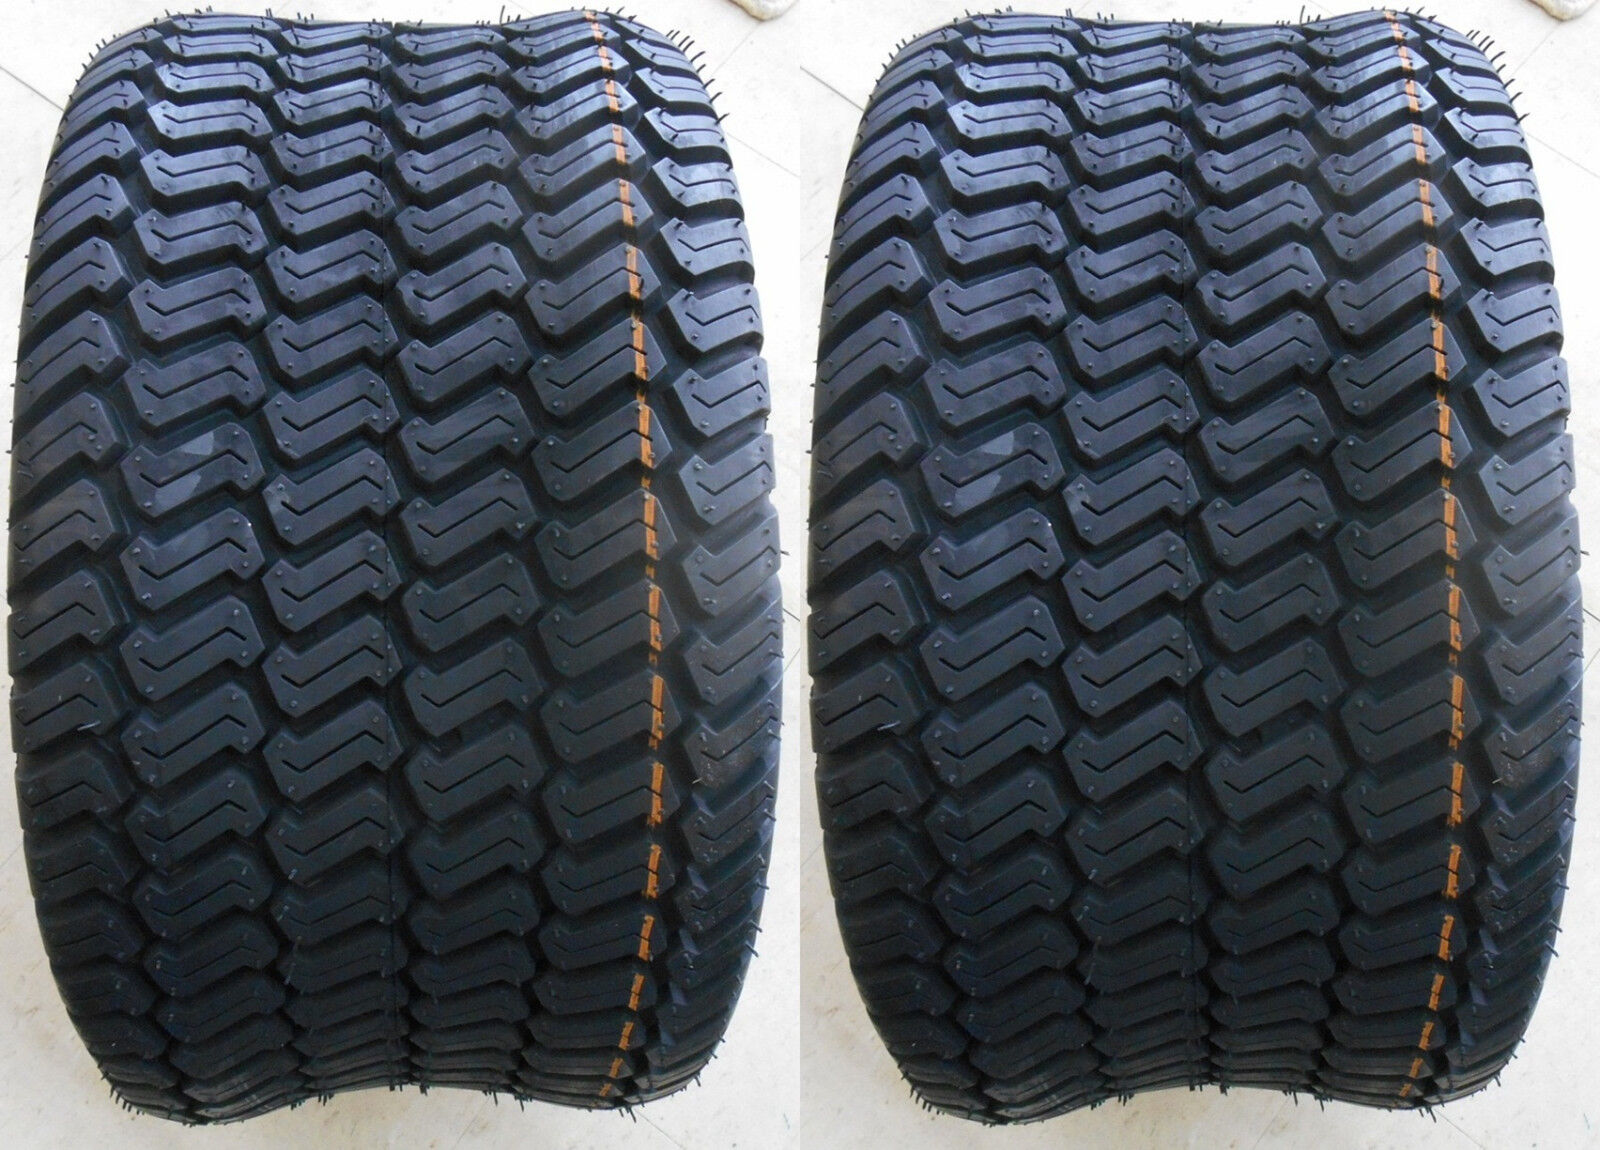 (TWO) 20x10-8 20x10.00-8  Lawn Mower Turf Tires Heavy Duty 6 Ply Rated P332 P332 LG3873